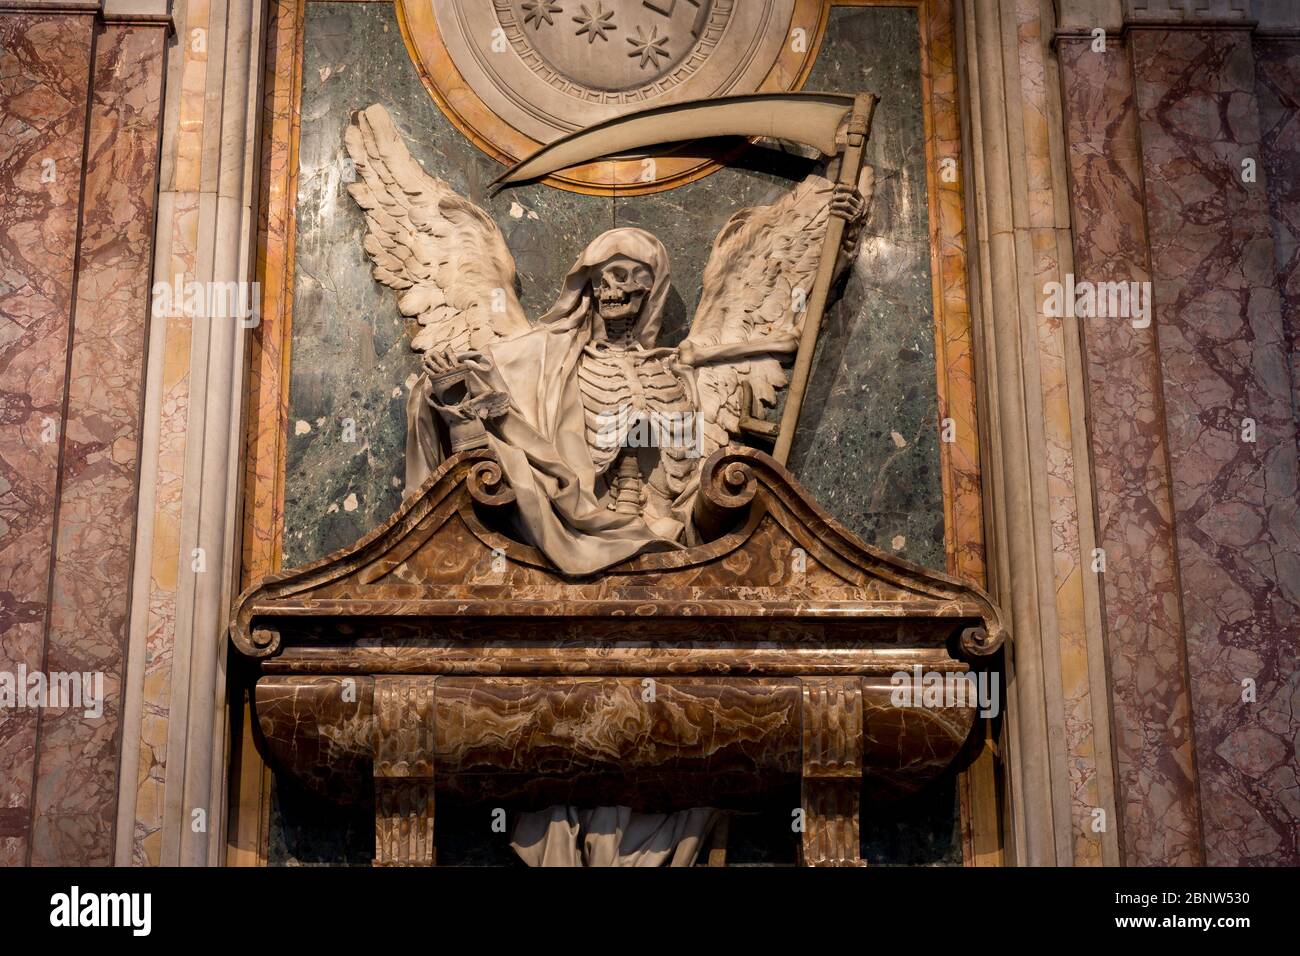 Rome, Italy - april 25, 2016: Saint Peter in Chains, a Roman Catholic church in Rome, Italy, best known for being the home of Michelangelo's statue of Stock Photo